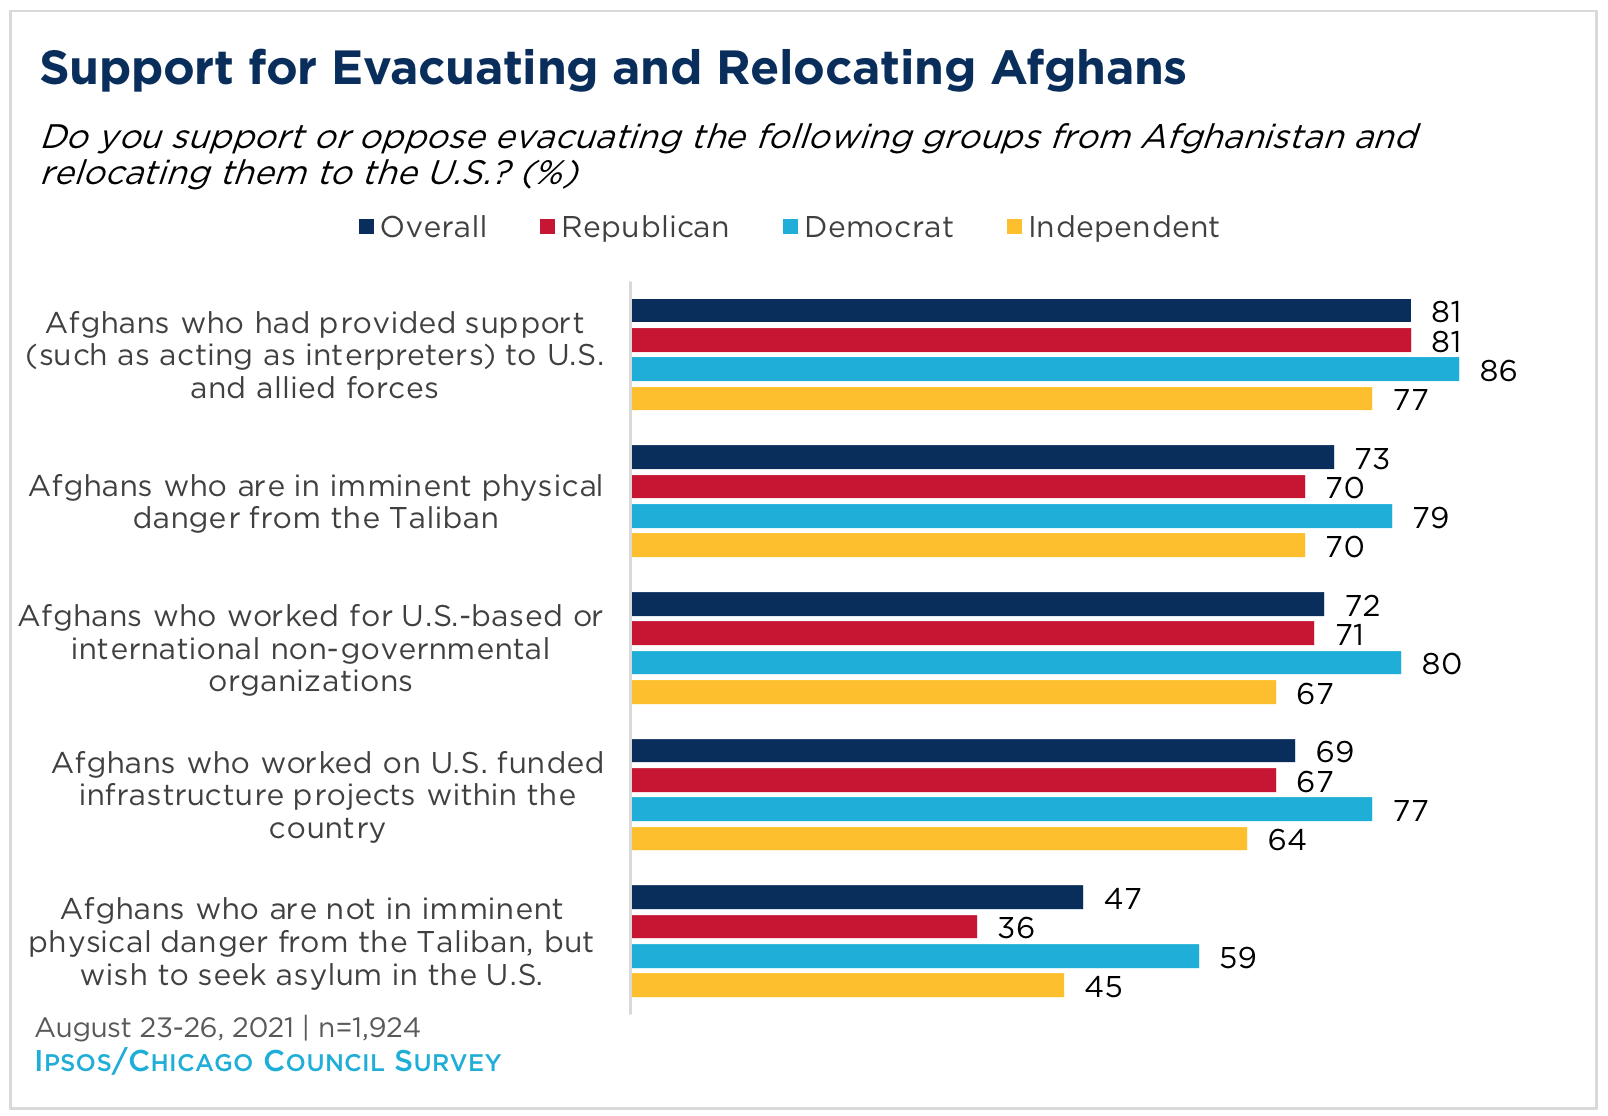 Bar graph showing support for evacuating and relocating Afghans